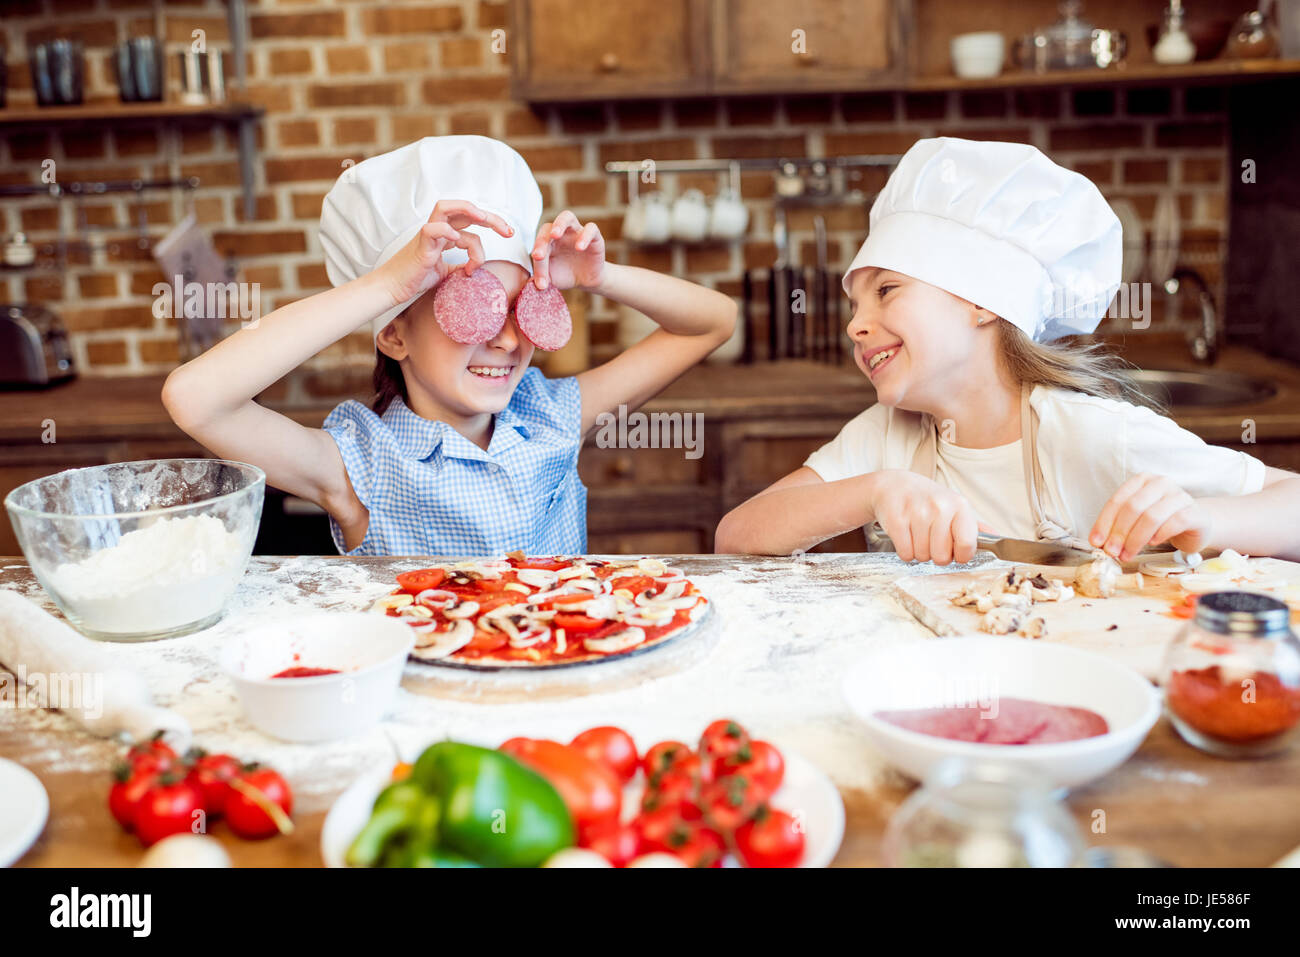 kids in chef hats having fun while making pizza Stock Photo